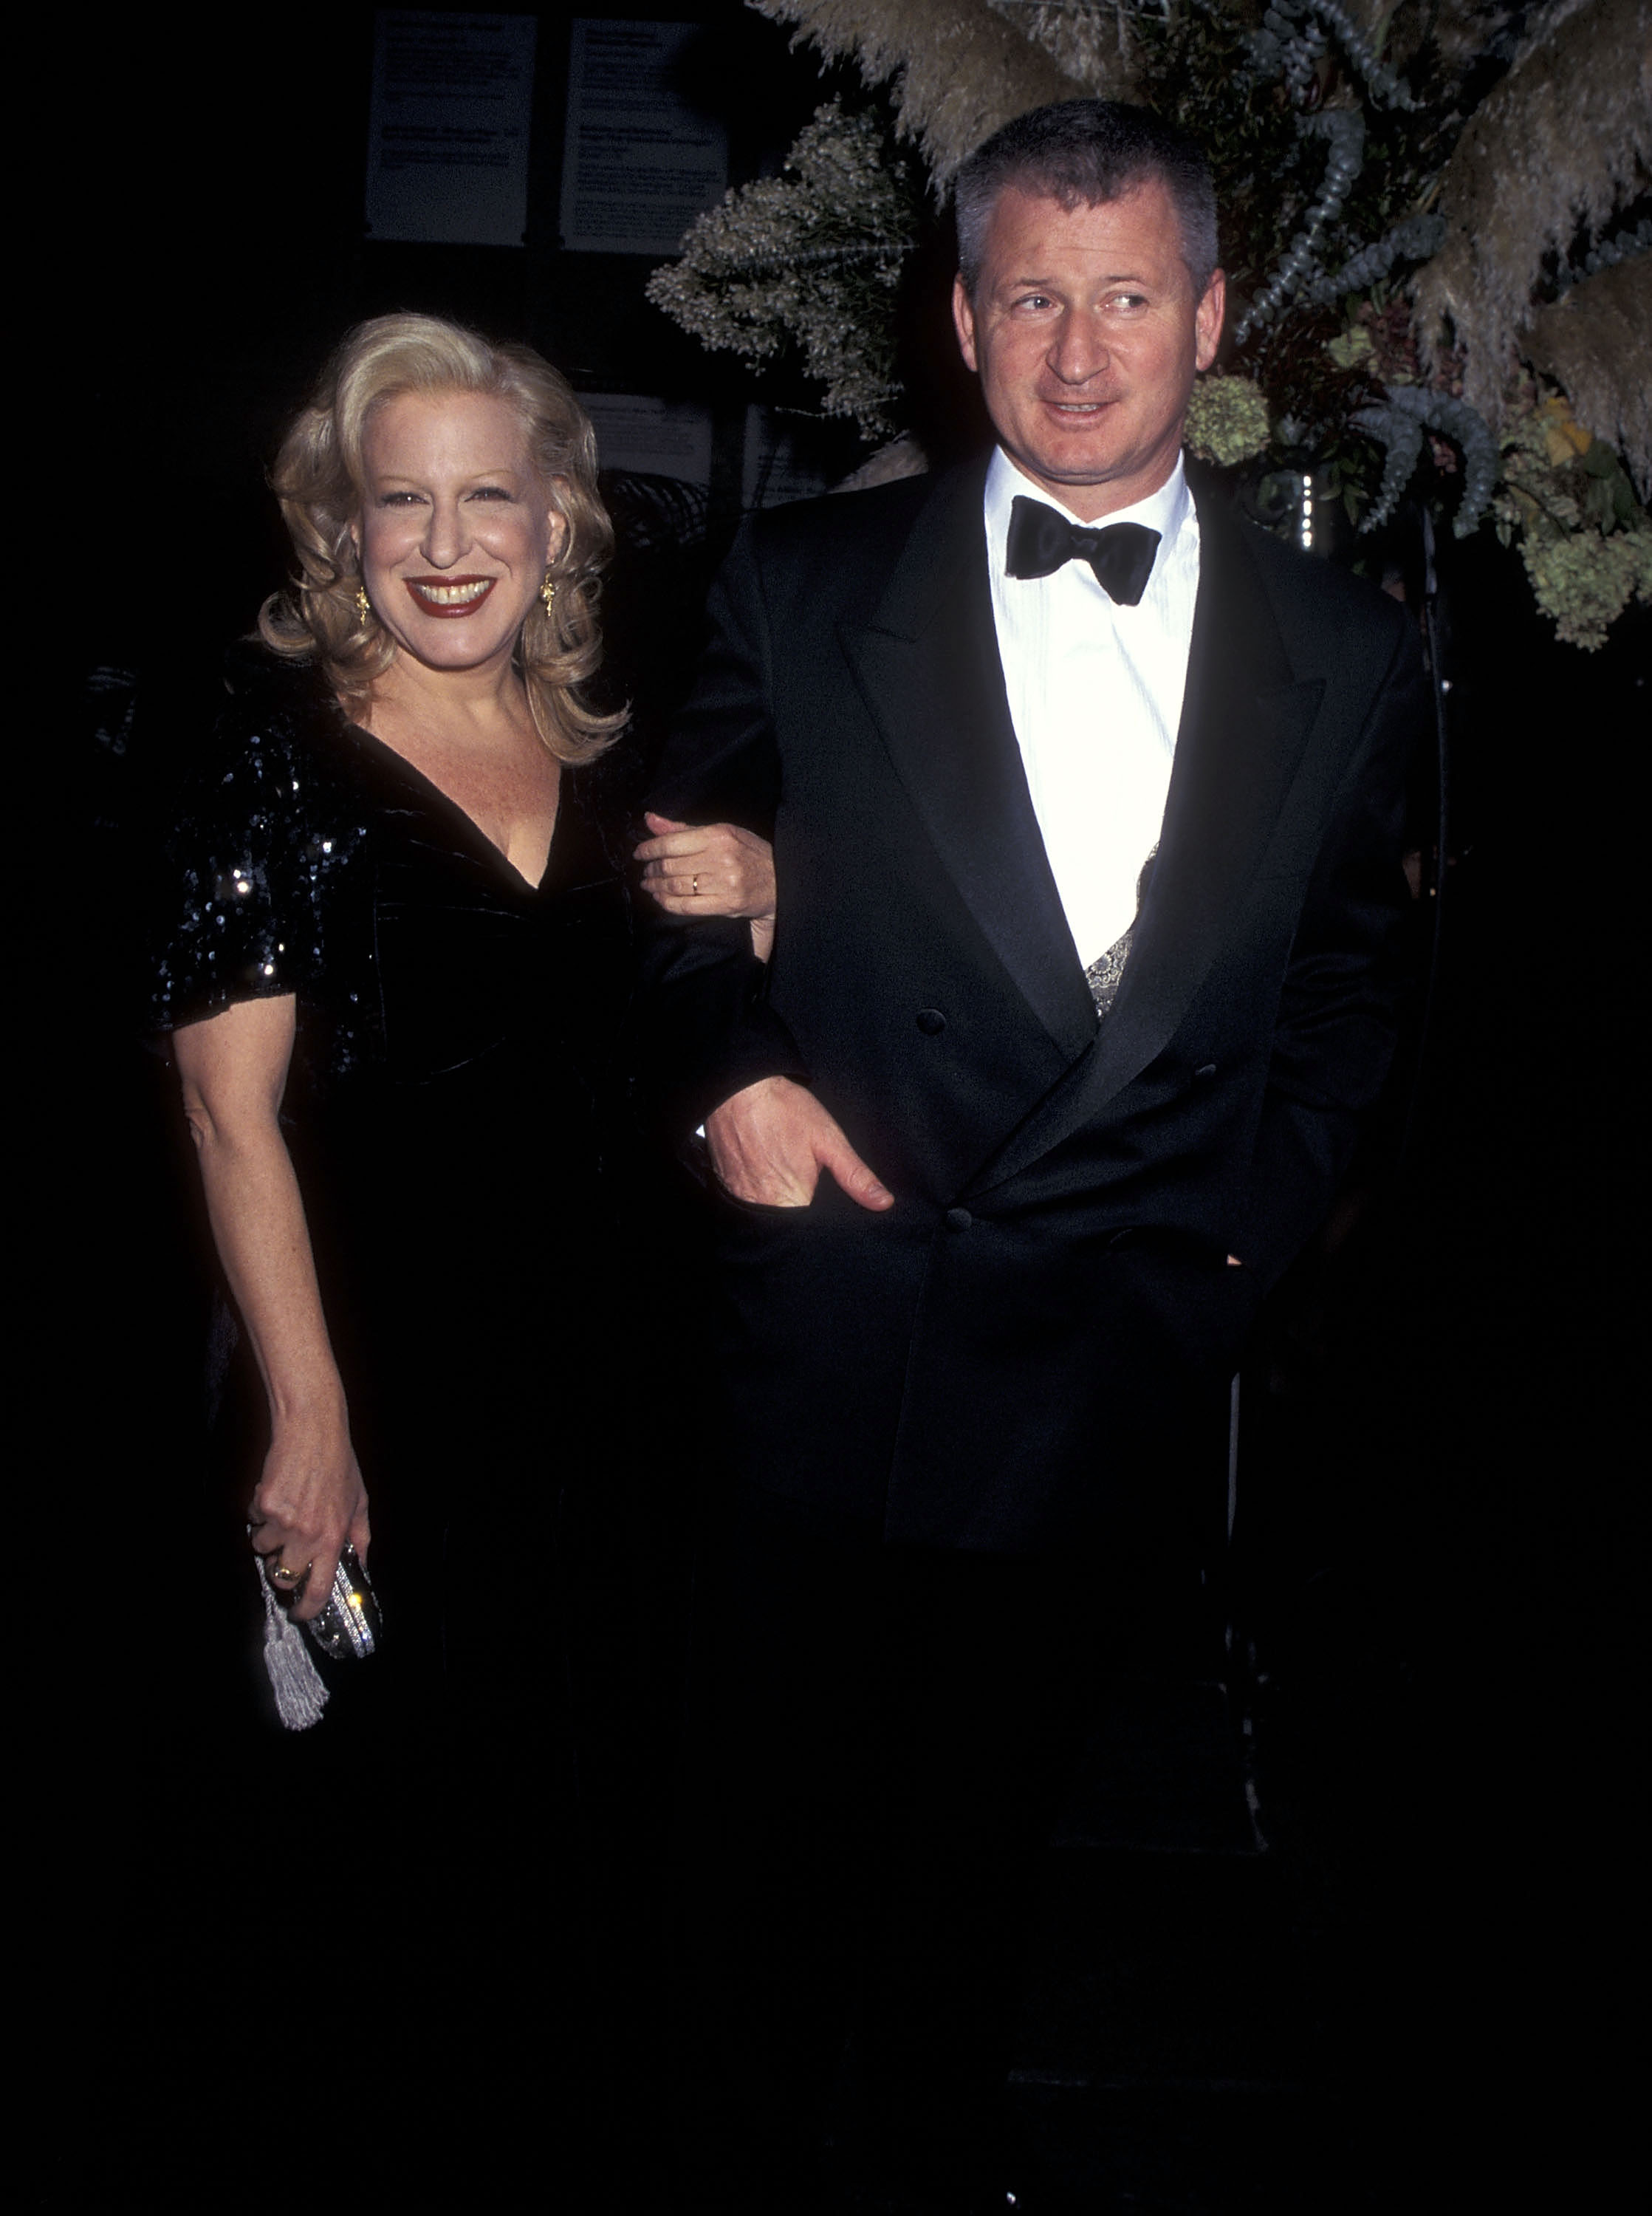 Bette Midler and husband Martin von Haselberg at the 'Manhattan Fantastica' Dinner Dance Gala, October 23, 1995, Whitney Museum, New York City | Source: Getty Images